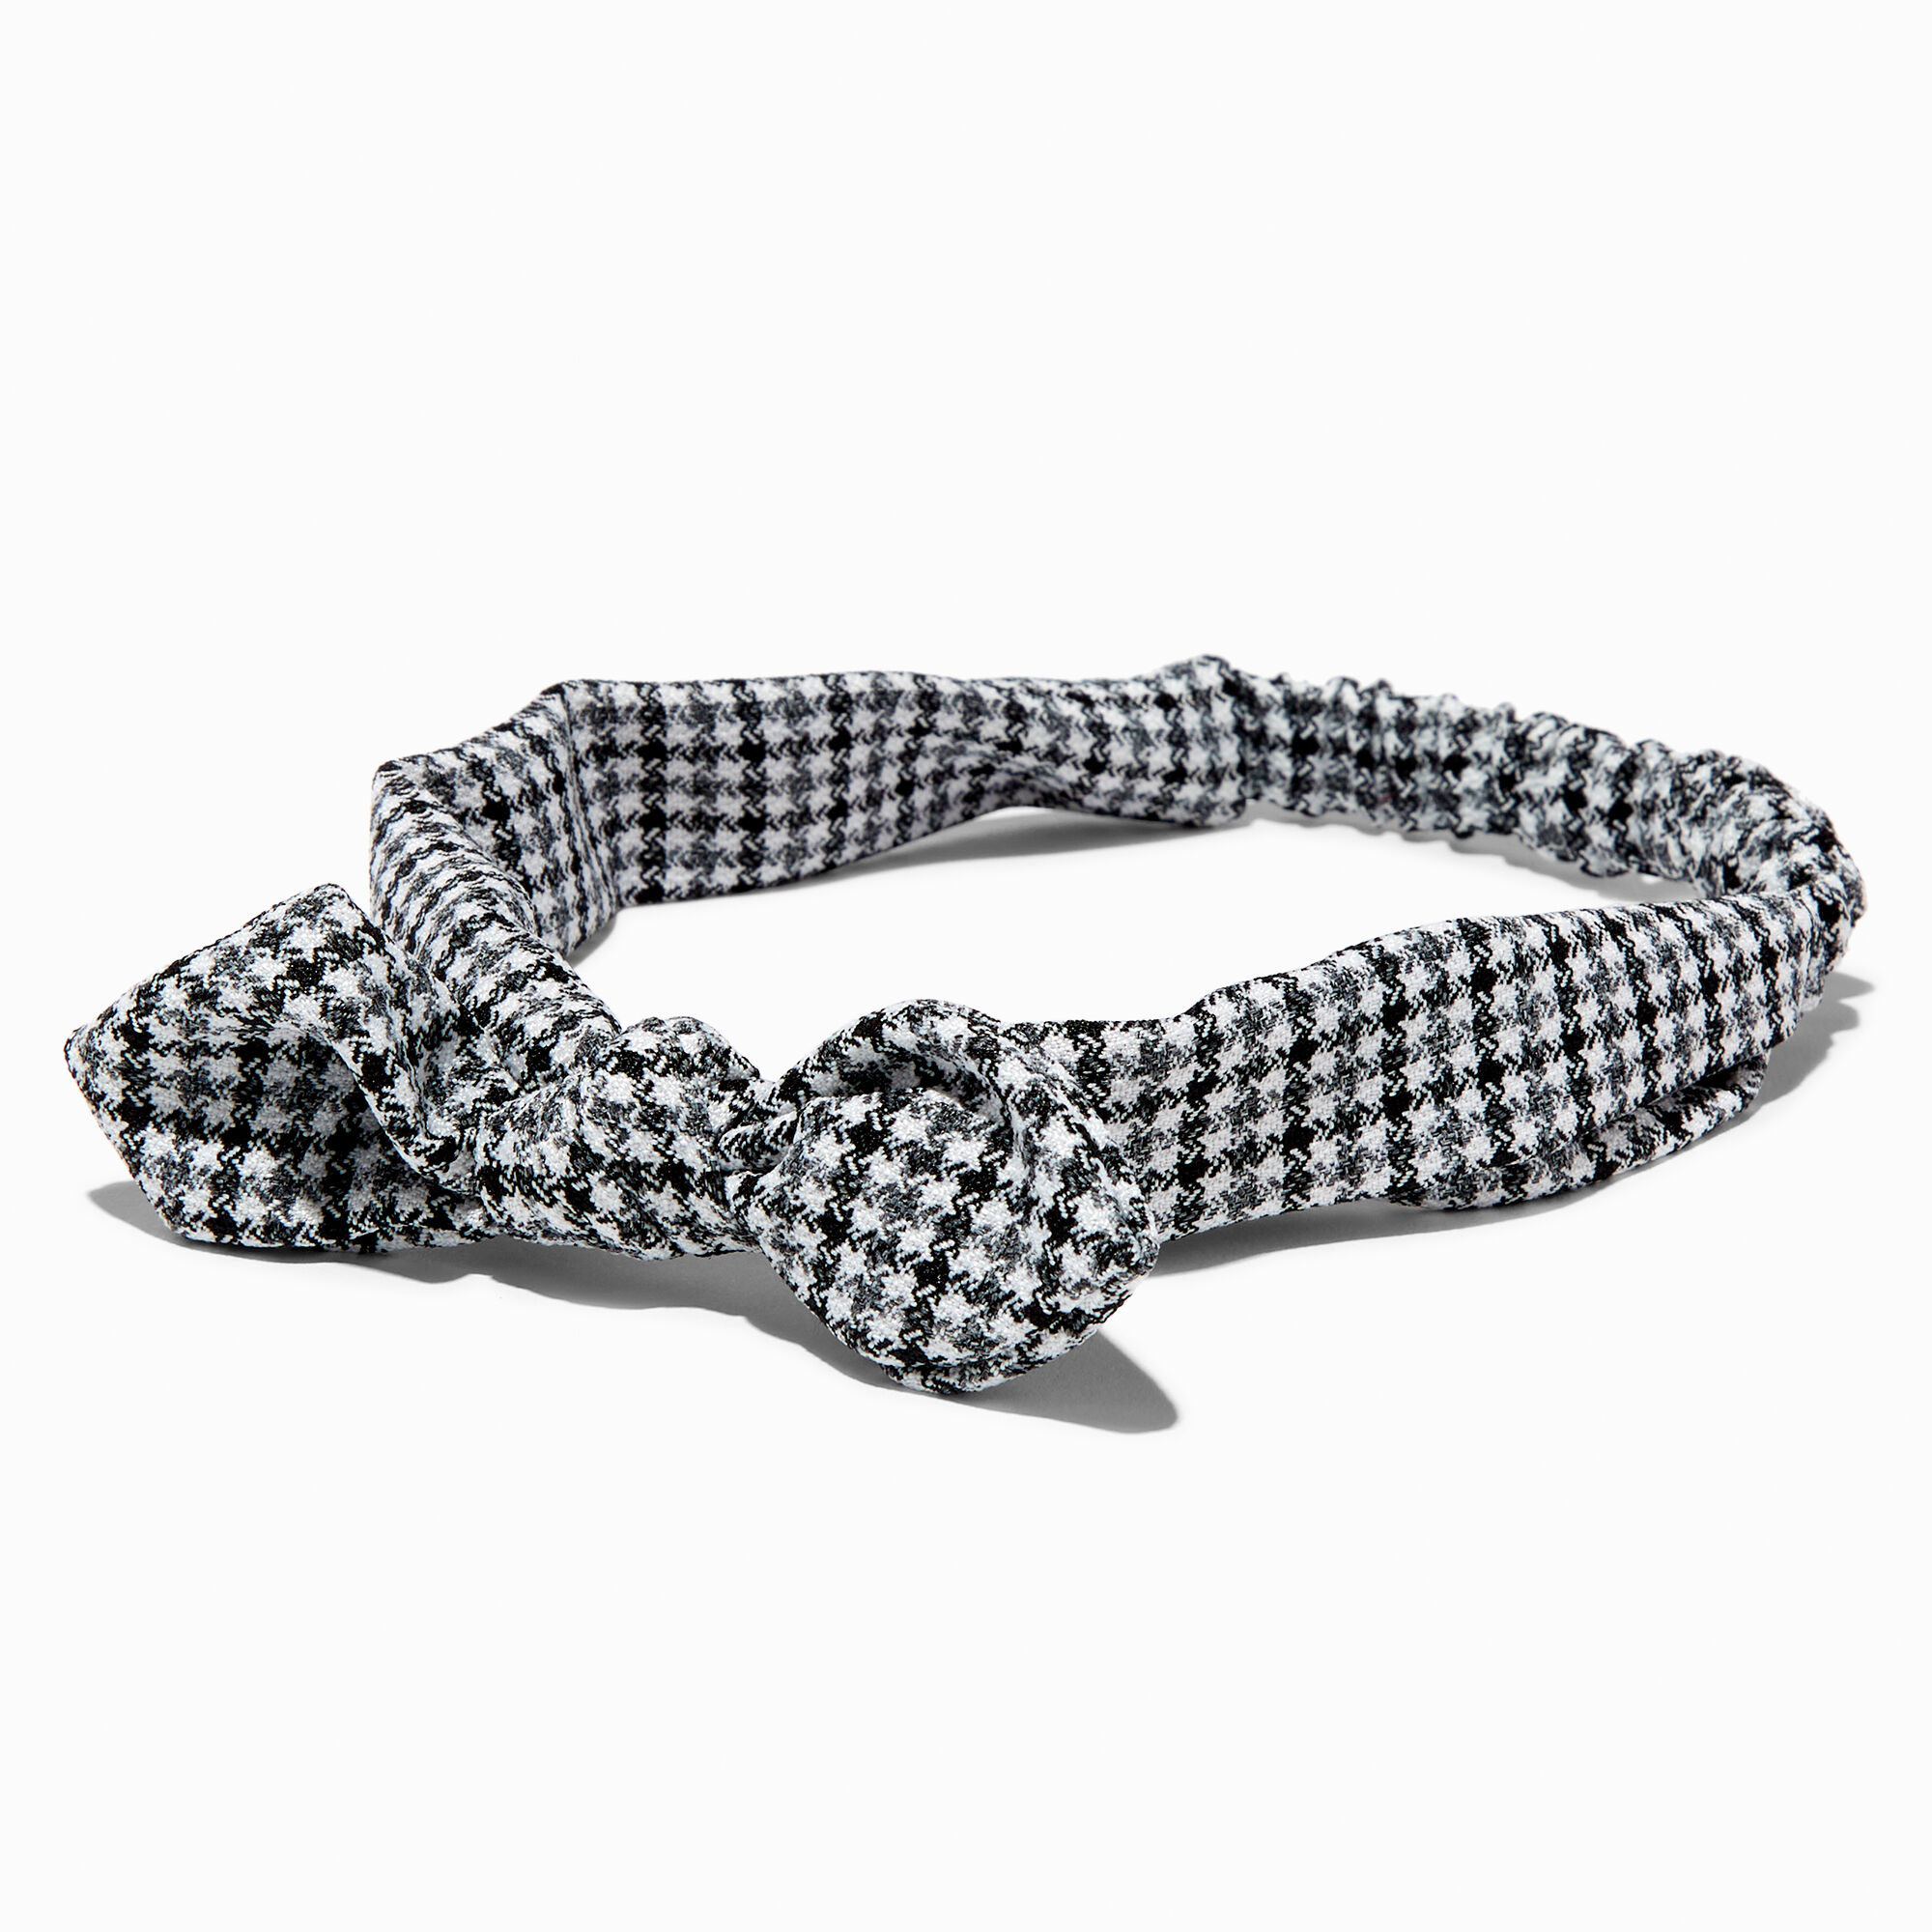 View Claires Houndstooth Knotted Bow Headwrap Black information